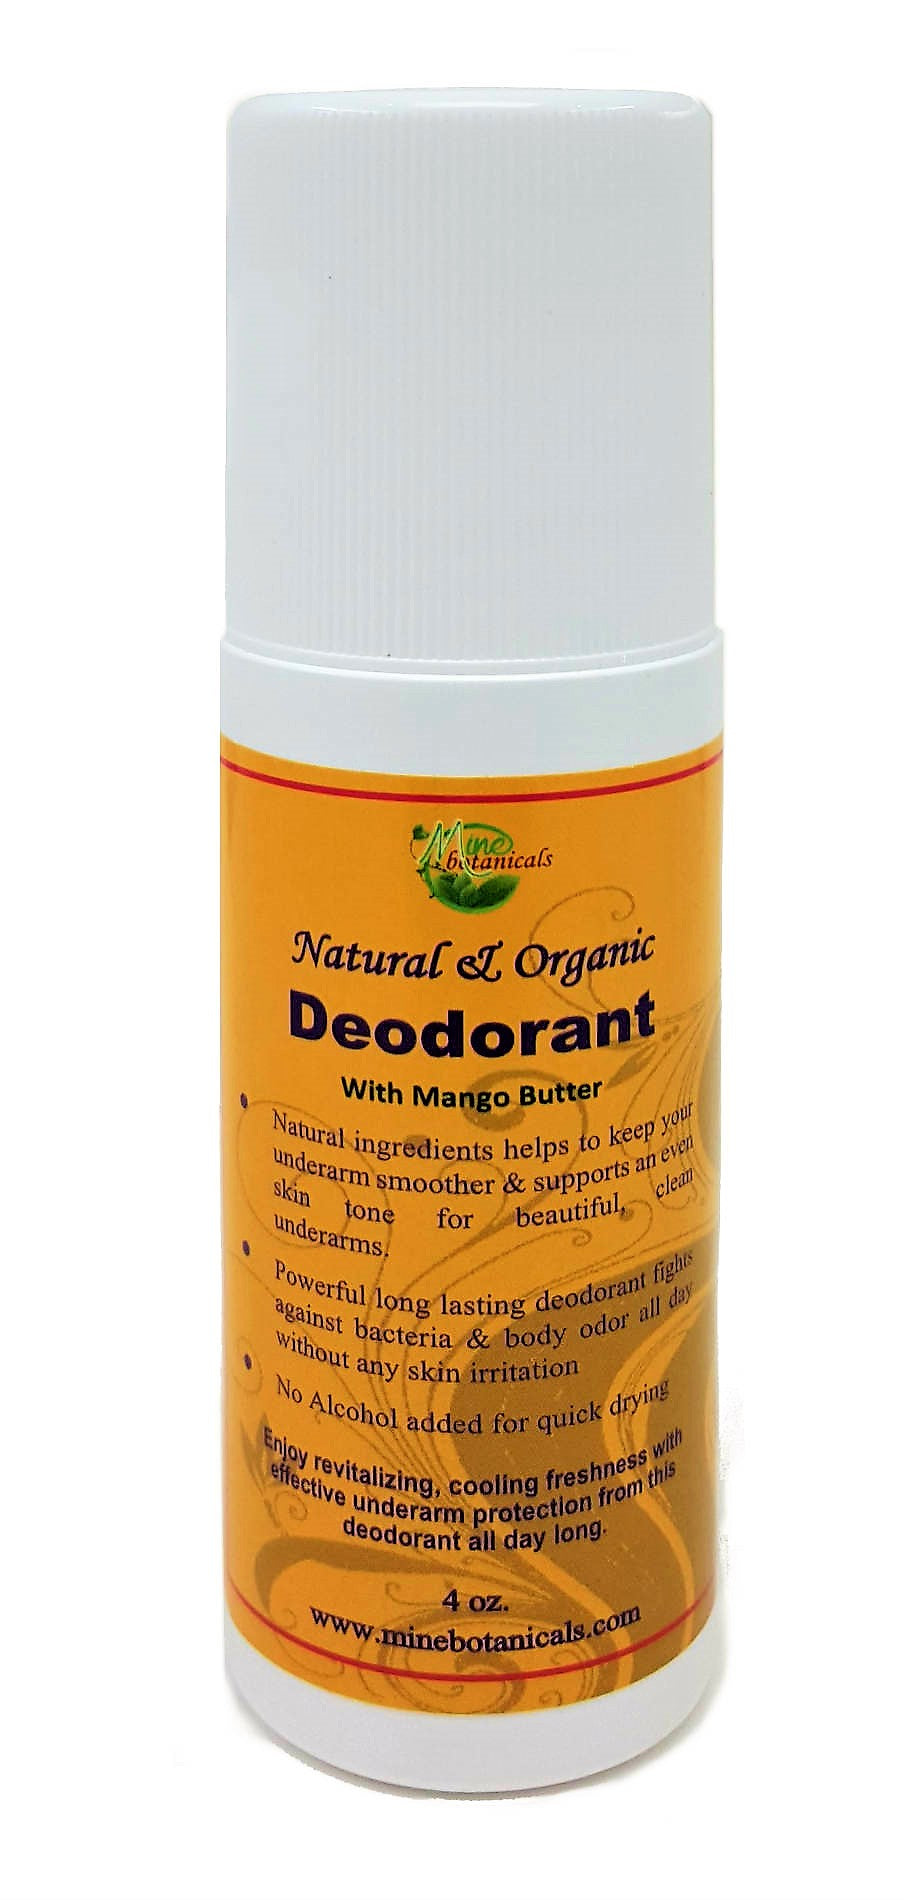 Natural & Organic Deodorant With Mango Butter